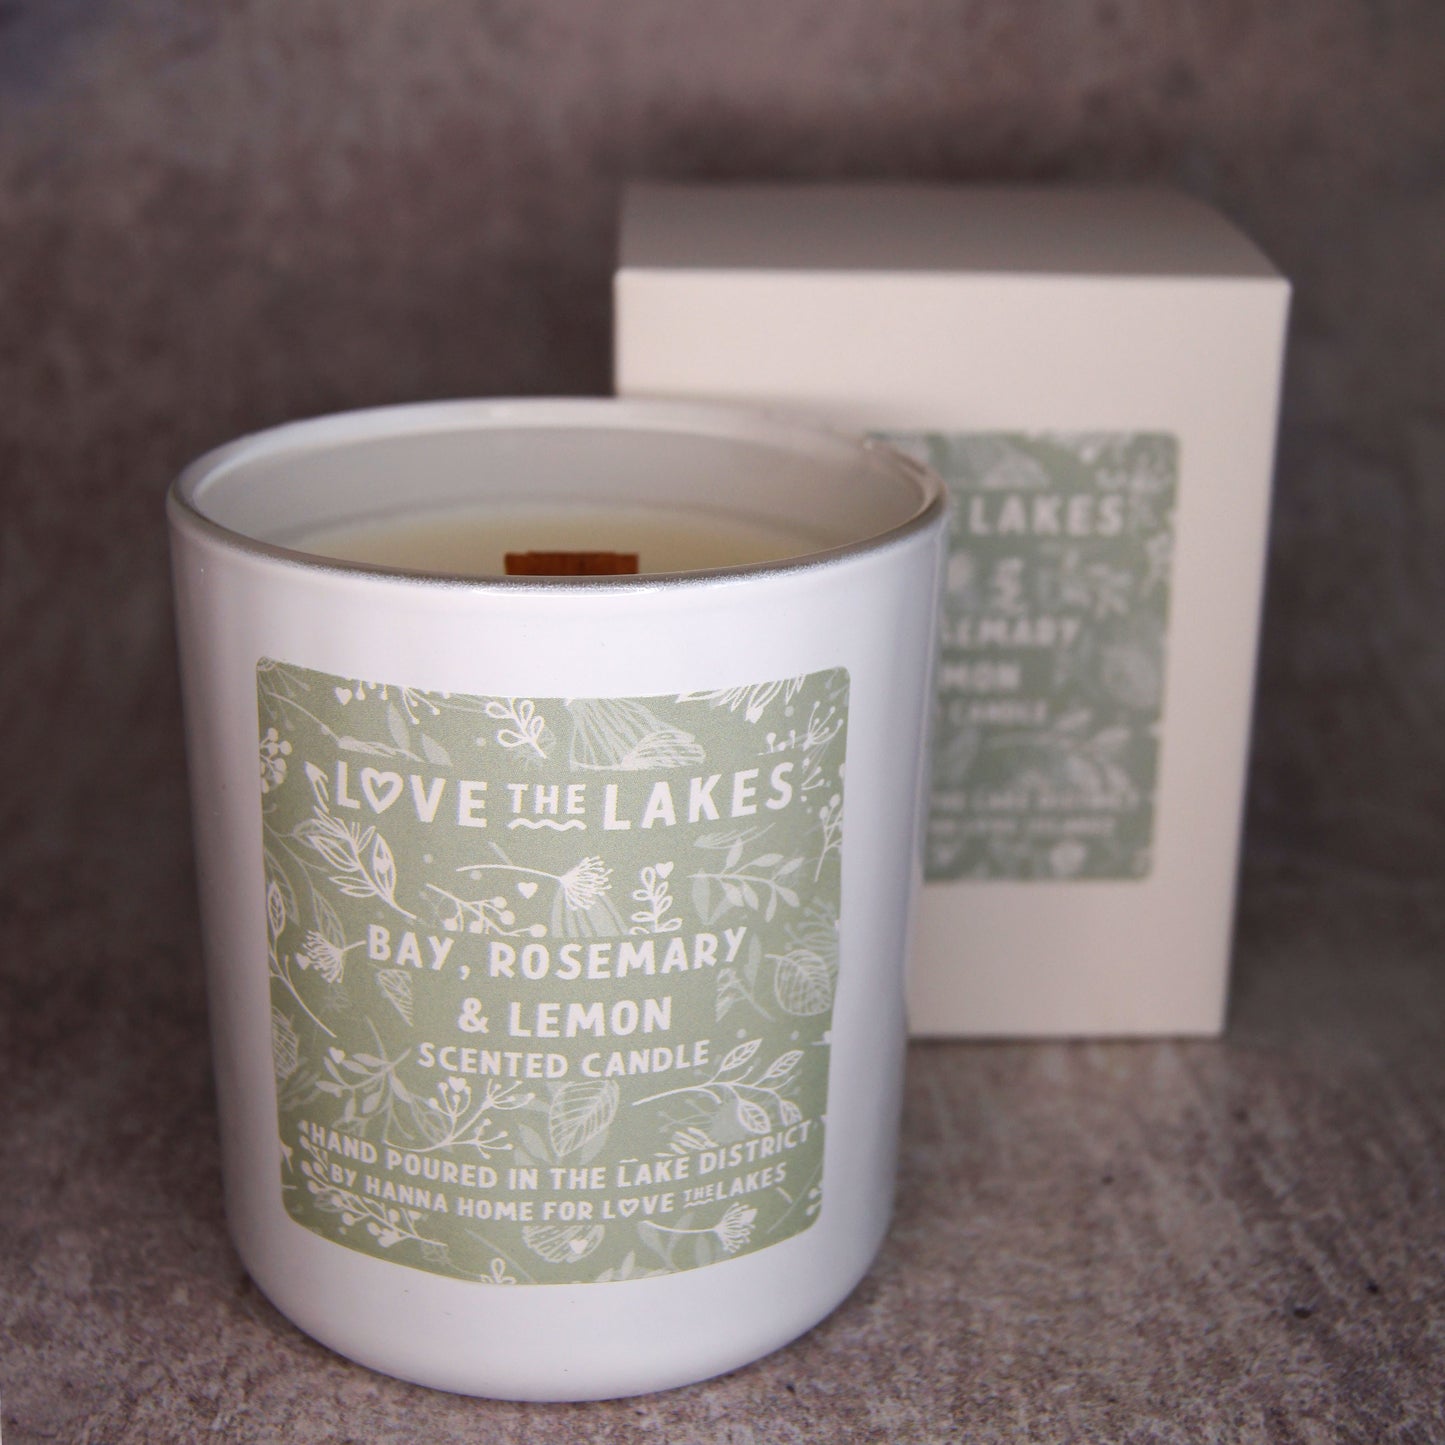 Bay, Rosemary & Lemon Scented Soy Wax Candle Jar